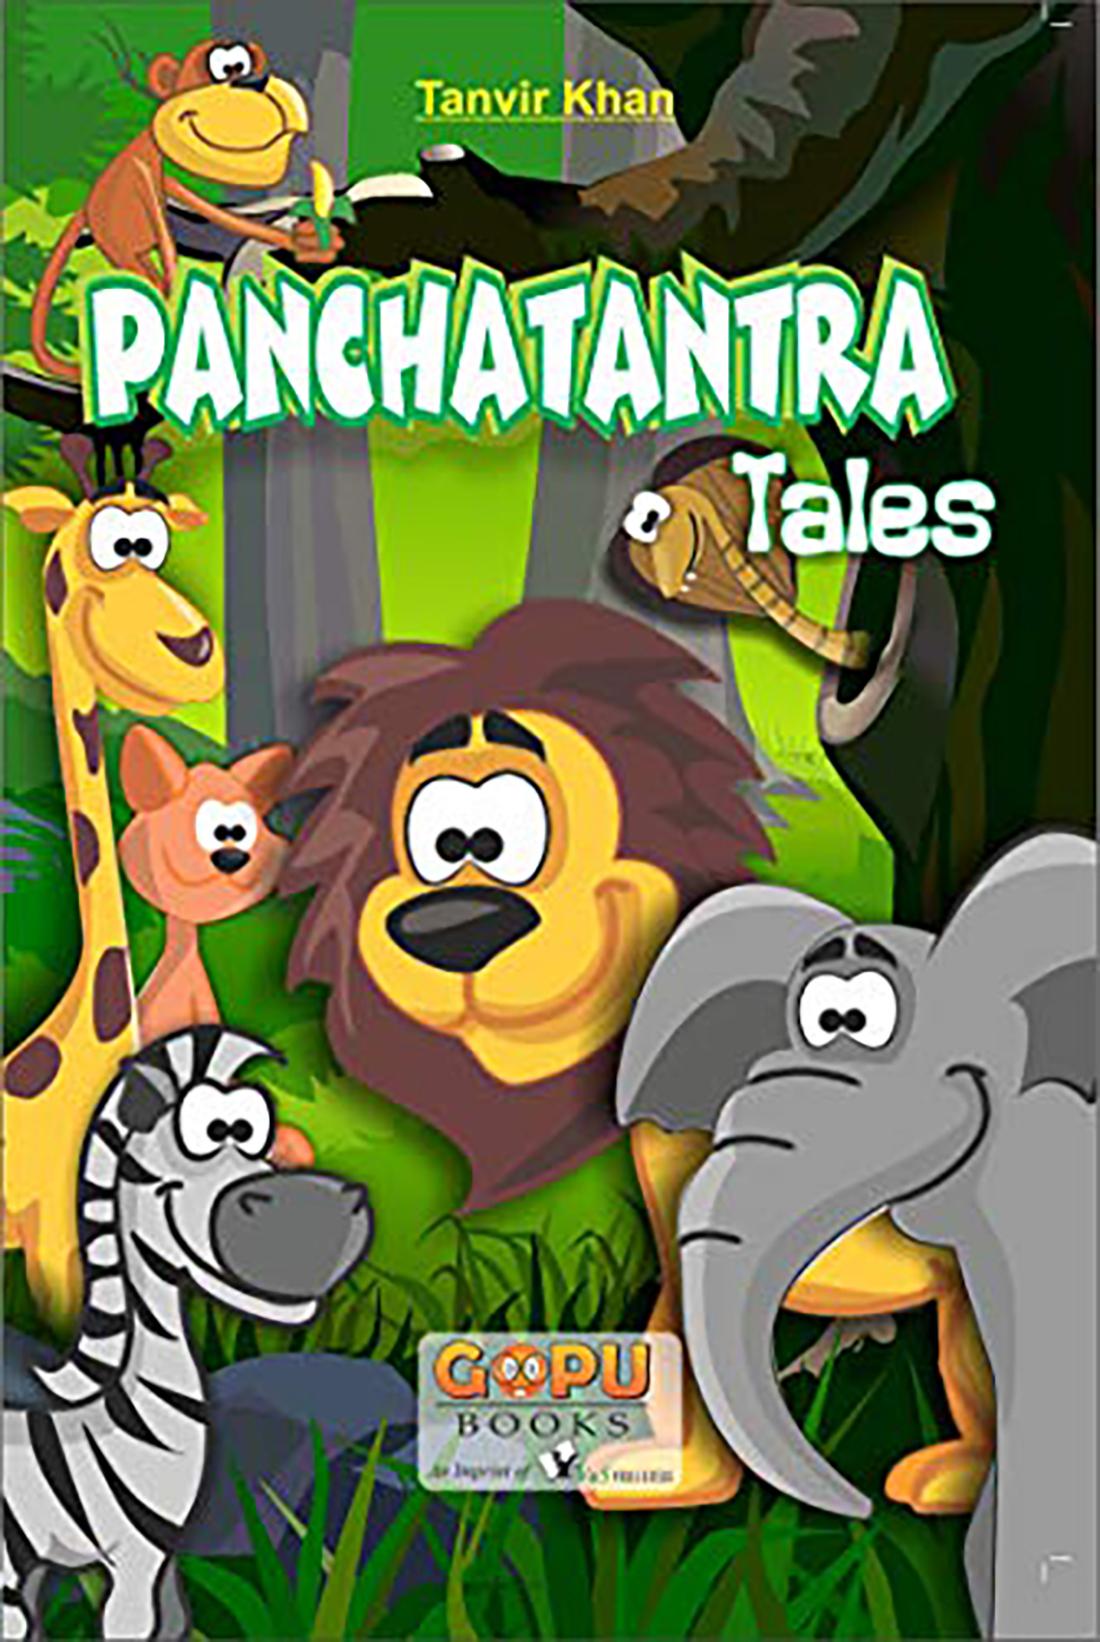 Panchatantra Tales 20 x 30 16- Moral Tales For Children Tanvir Khan  Paperback 88 Pages - JioMart